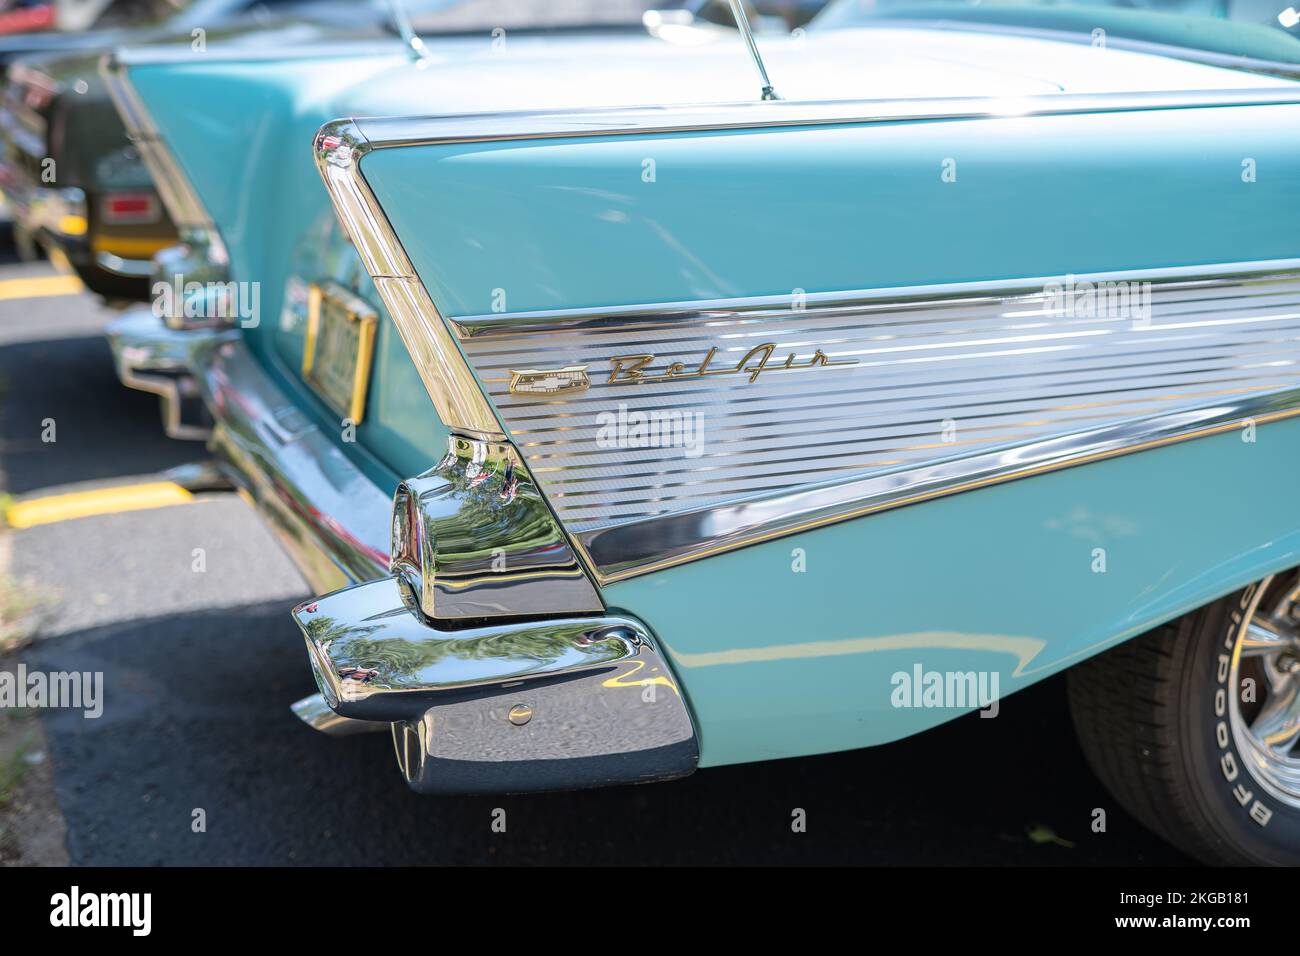 NISSWA, MN – 30 JUL 2022: Rear tailfin of a restored classic 1957 Chevrolet Bel Air automobile, in closeup view. An iconic feature of the Chevy 57 car Stock Photo